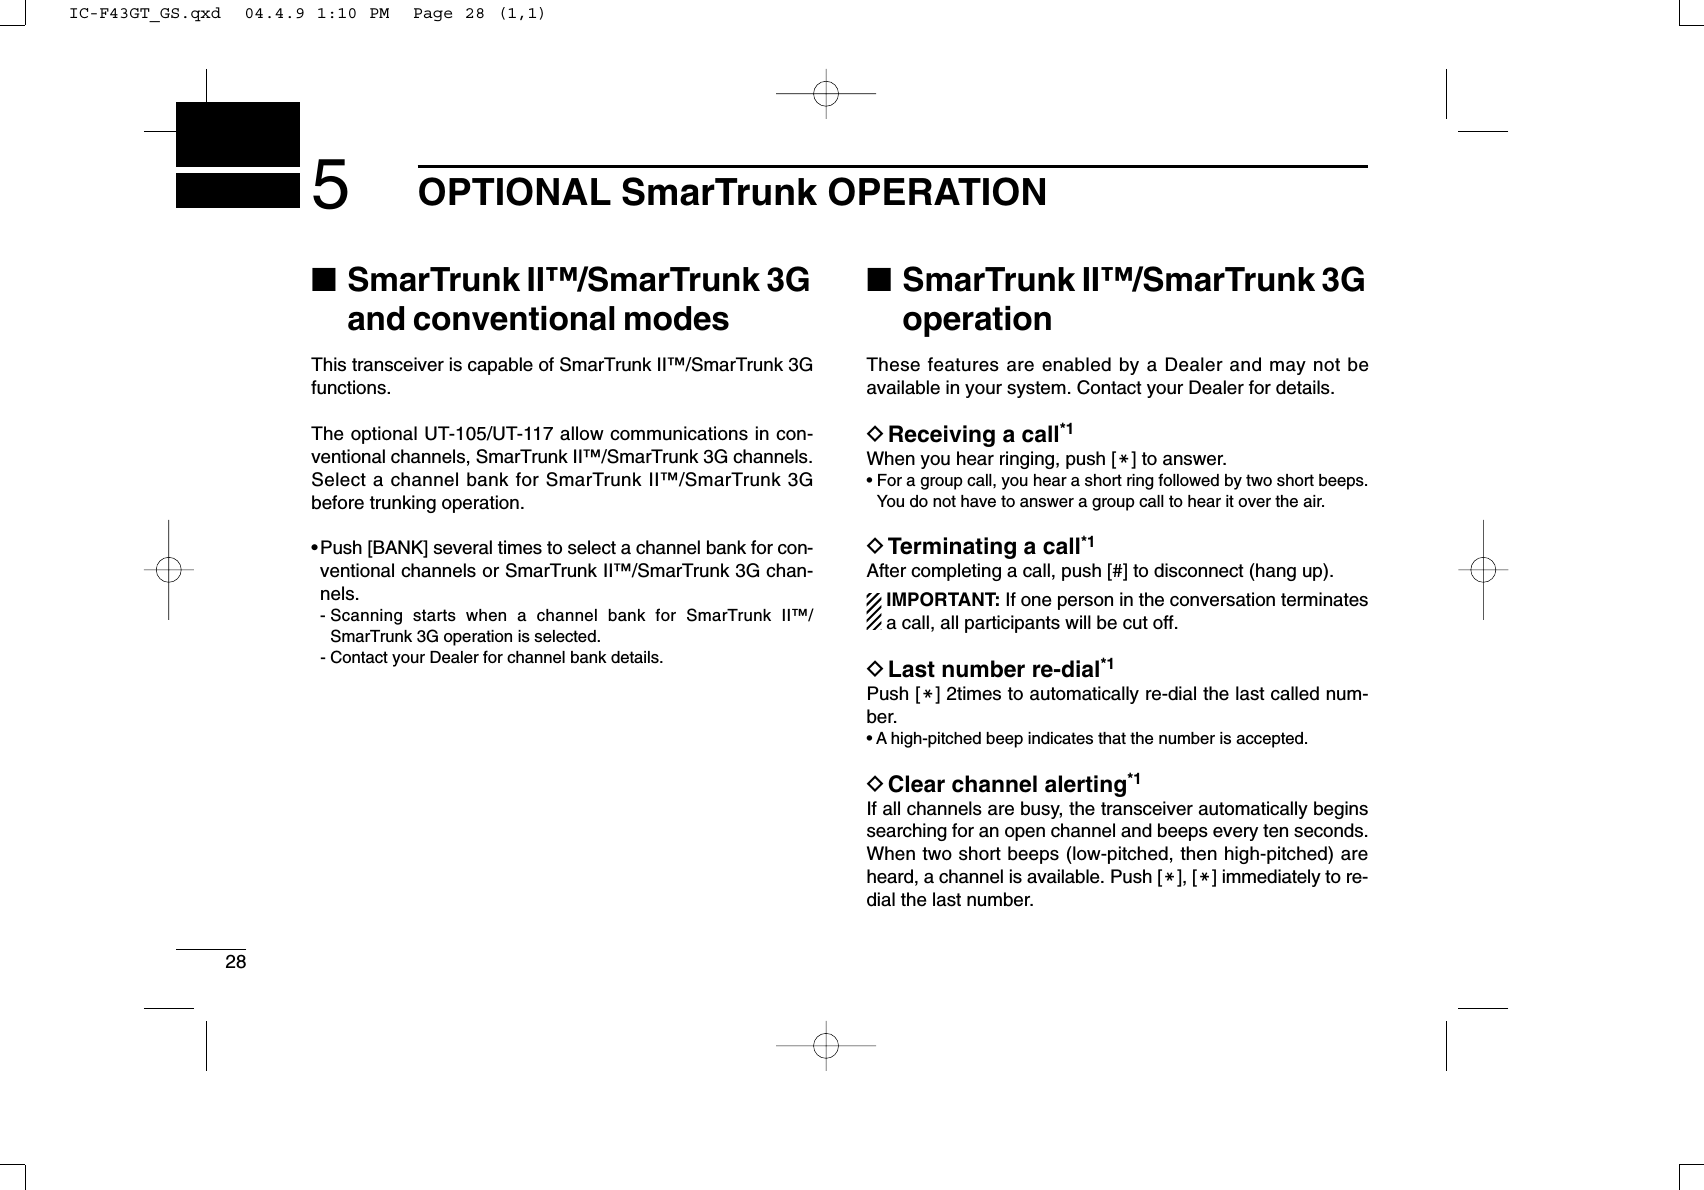 285OPTIONAL SmarTrunk OPERATION■SmarTrunk II™/SmarTrunk 3Gand conventional modesThis transceiver is capable of SmarTrunk II™/SmarTrunk 3Gfunctions.The optional UT-105/UT-117 allow communications in con-ventional channels, SmarTrunk II™/SmarTrunk 3G channels.Select a channel bank for SmarTrunk II™/SmarTrunk 3Gbefore trunking operation.•Push [BANK] several times to select a channel bank for con-ventional channels or SmarTrunk II™/SmarTrunk 3G chan-nels.- Scanning starts when a channel bank for SmarTrunk II™/SmarTrunk 3G operation is selected.- Contact your Dealer for channel bank details.■SmarTrunk II™/SmarTrunk 3GoperationThese features are enabled by a Dealer and may not beavailable in your system. Contact your Dealer for details.DReceiving a call*1When you hear ringing, push [M] to answer.• For a group call, you hear a short ring followed by two short beeps.You do not have to answer a group call to hear it over the air.DTerminating a call*1After completing a call, push [#] to disconnect (hang up).IMPORTANT: If one person in the conversation terminatesa call, all participants will be cut off.DLast number re-dial*1Push [M] 2times to automatically re-dial the last called num-ber.• A high-pitched beep indicates that the number is accepted.DClear channel alerting*1If all channels are busy, the transceiver automatically beginssearching for an open channel and beeps every ten seconds.When two short beeps (low-pitched, then high-pitched) areheard, a channel is available. Push [M], [M] immediately to re-dial the last number.IC-F43GT_GS.qxd  04.4.9 1:10 PM  Page 28 (1,1)